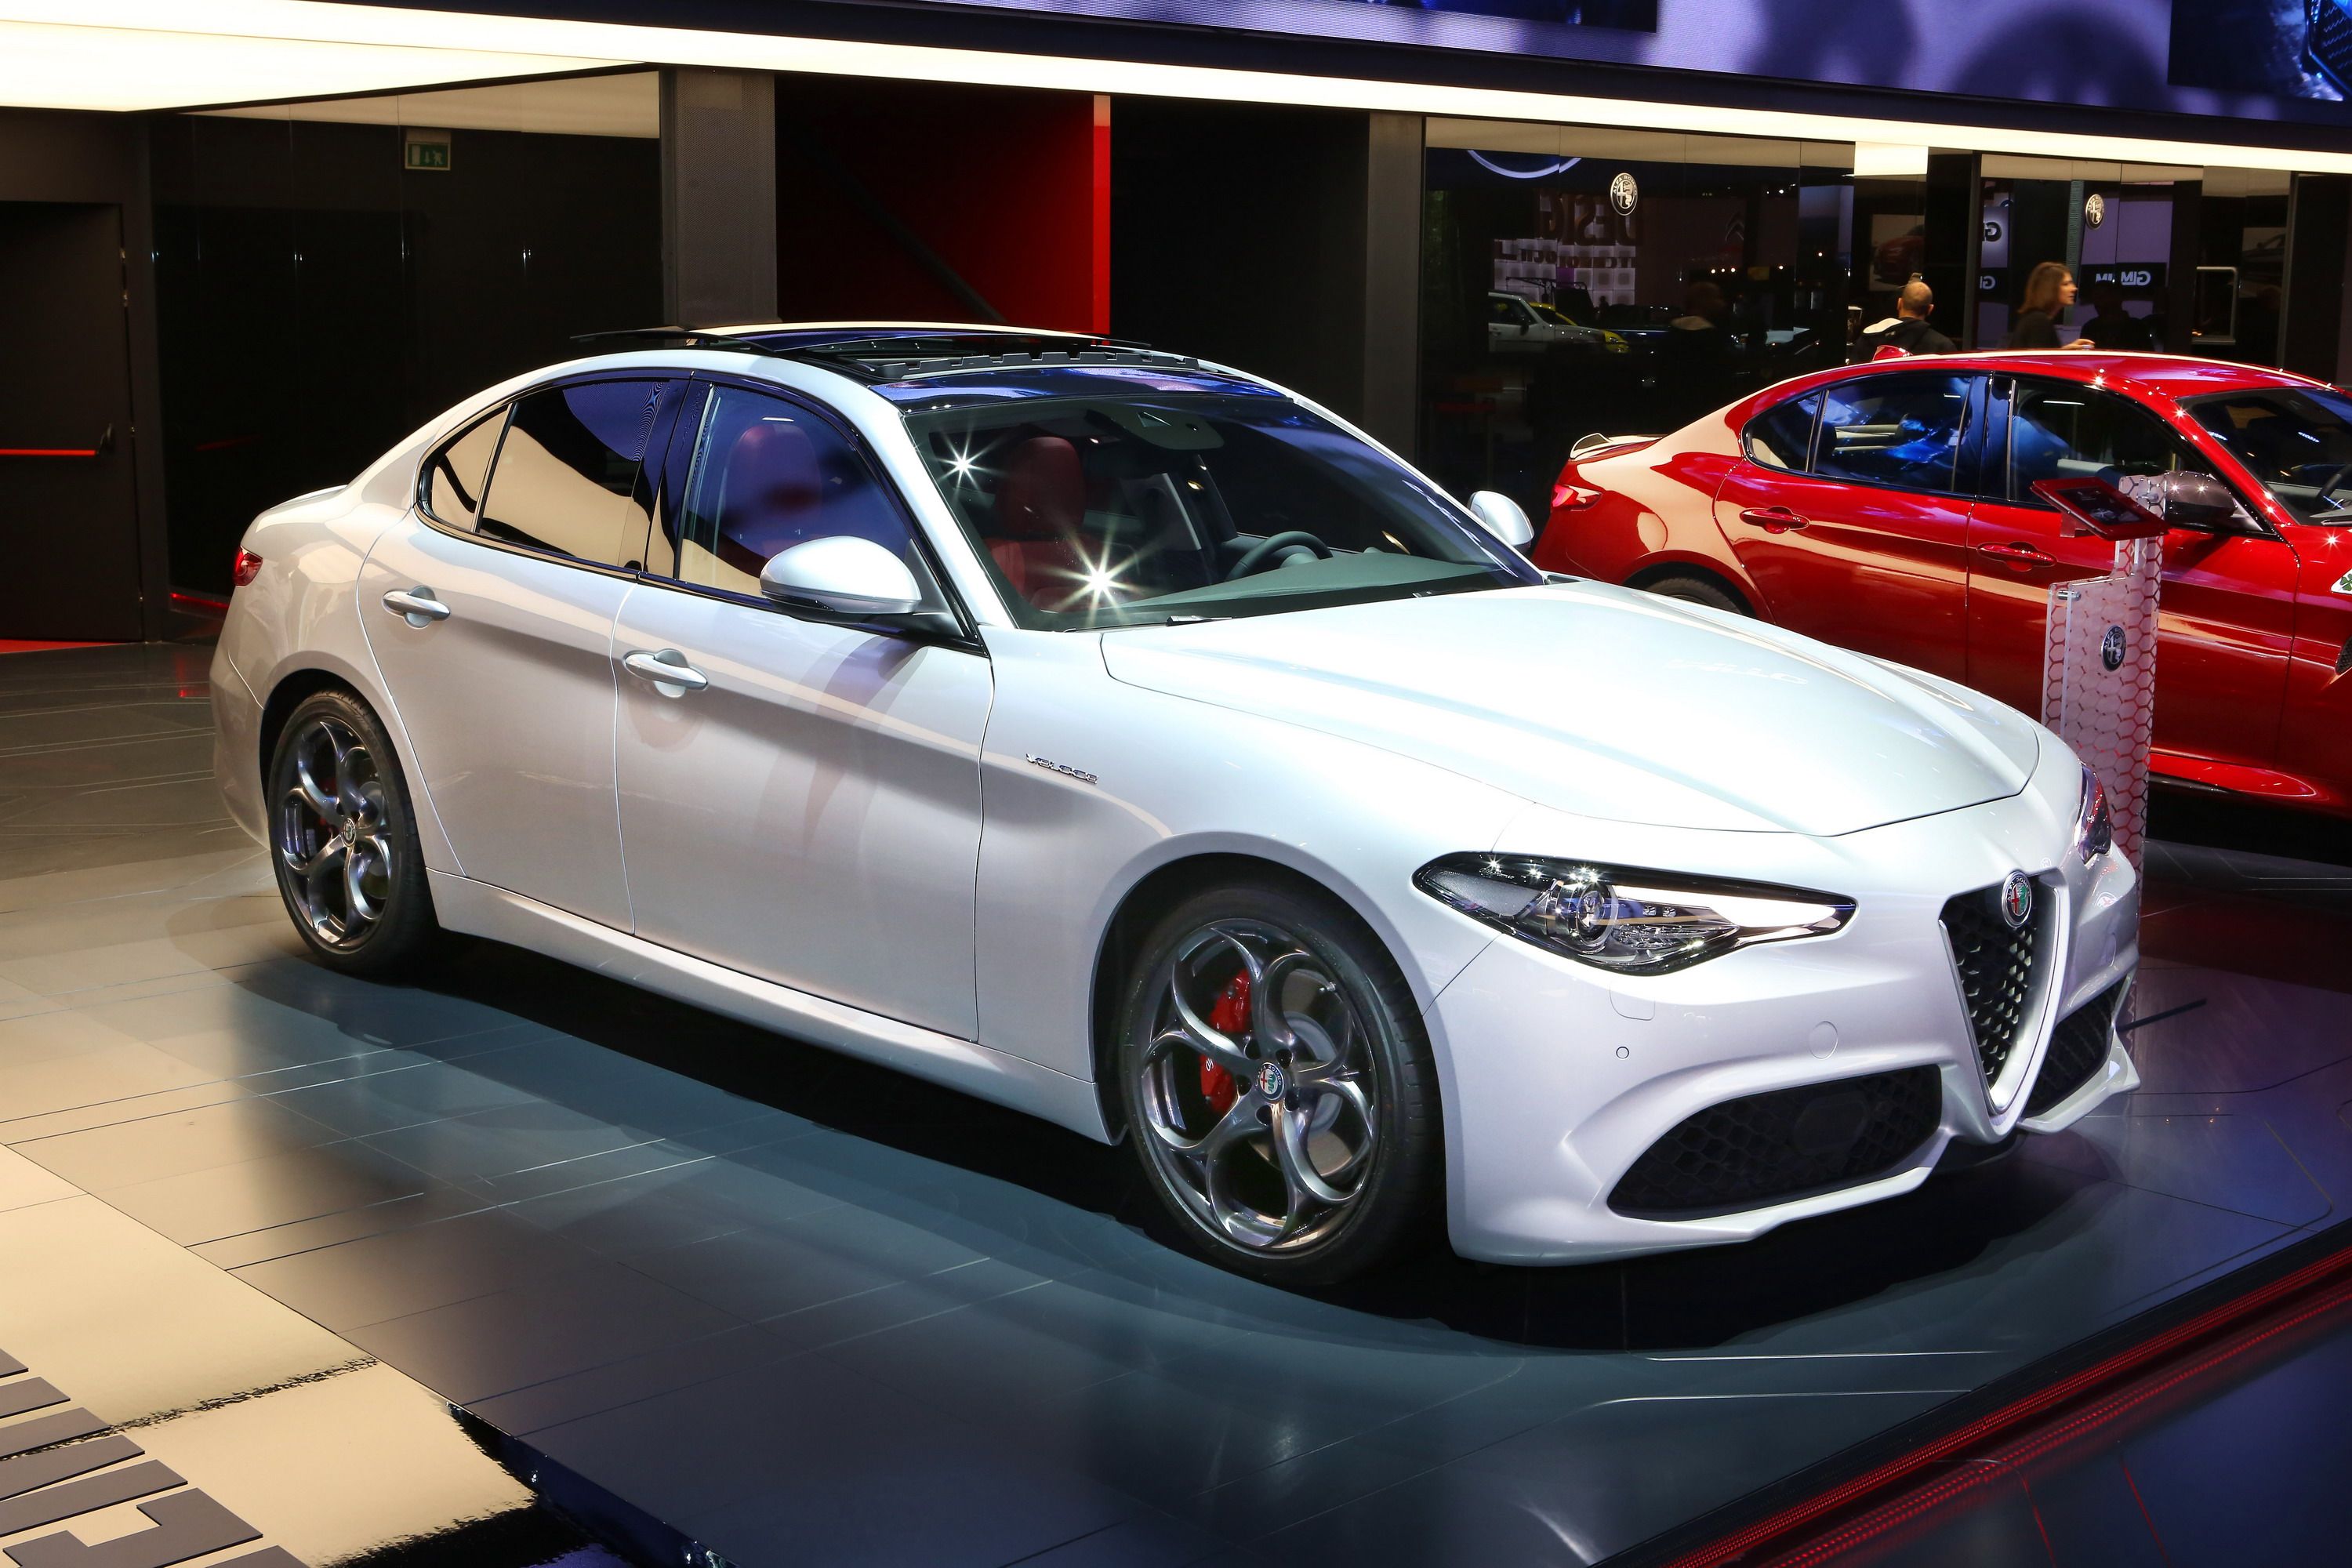 Alfa Romeo Giulia To Return For Its Second Generation As An EV With a 500-mile Range